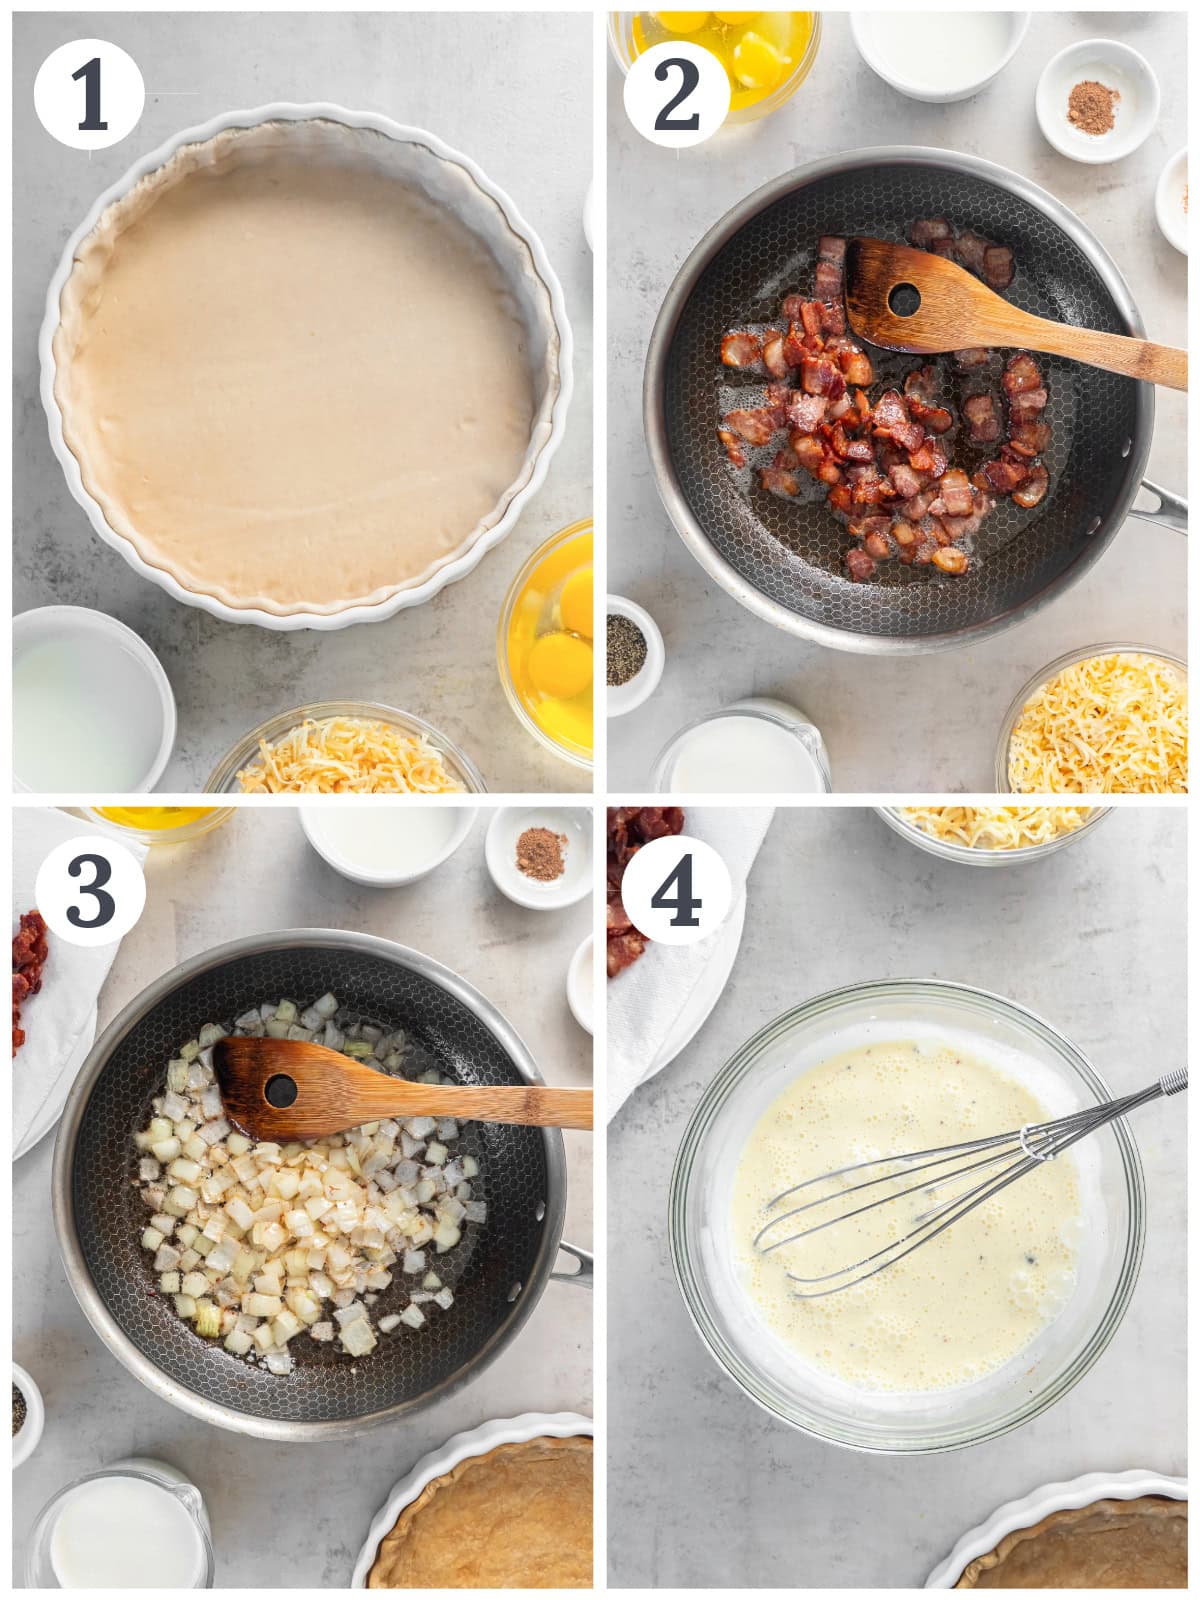 photo collage demonstrating how to prepare pie crust for quiche and make cook lardons (bacon) and onions in a skillet for quiche lorraine filling.